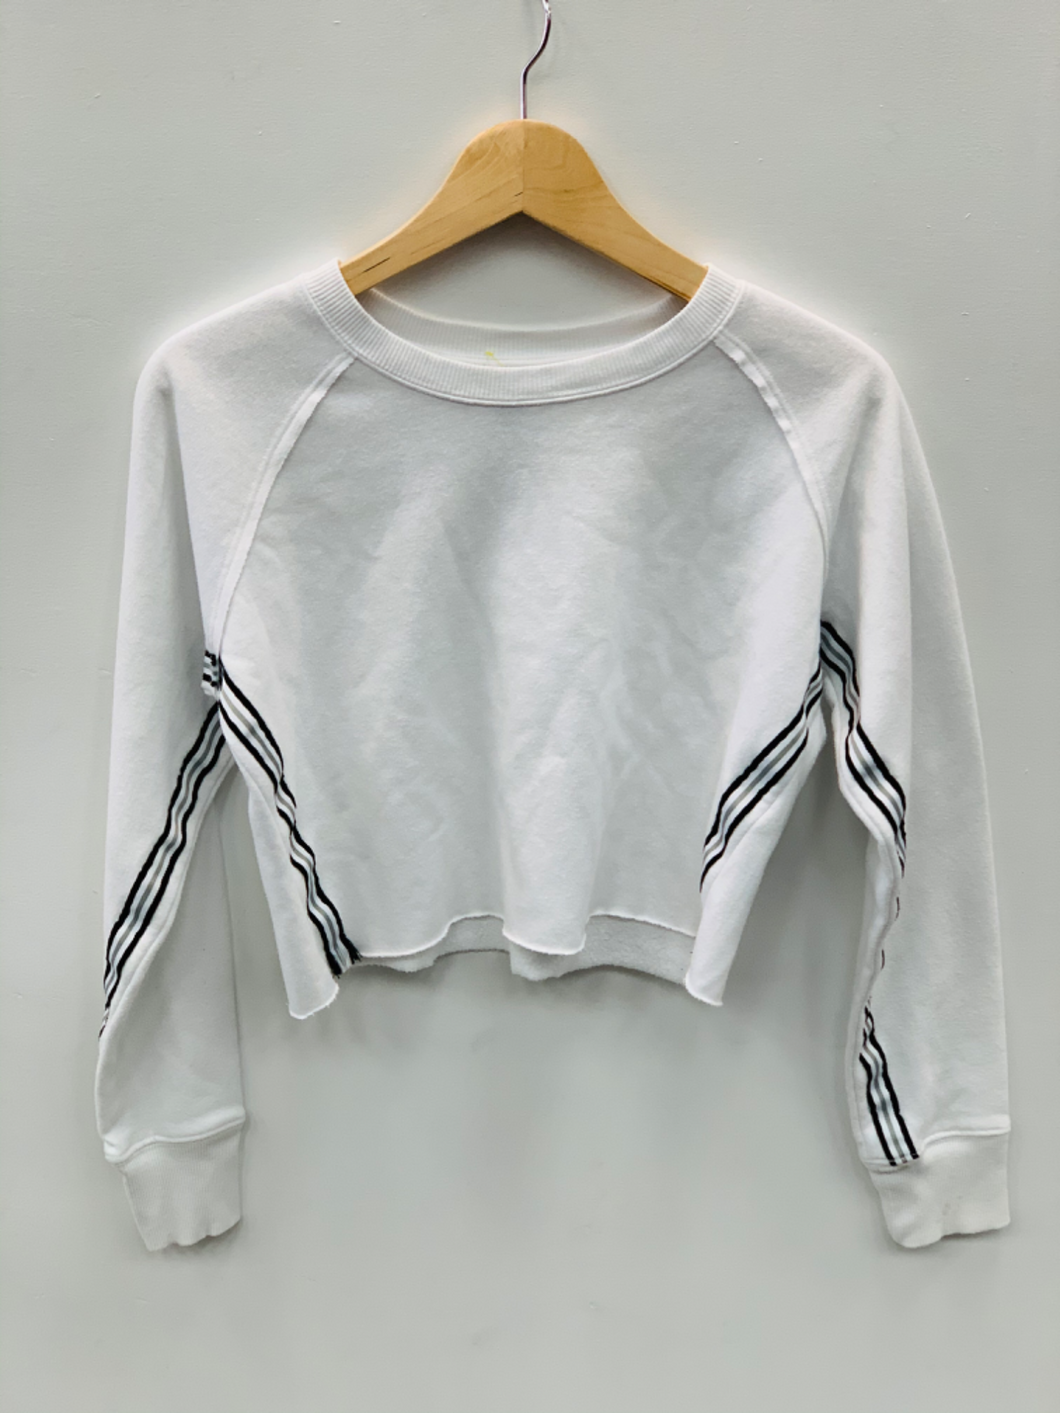 Long Sleeve Top Size Small